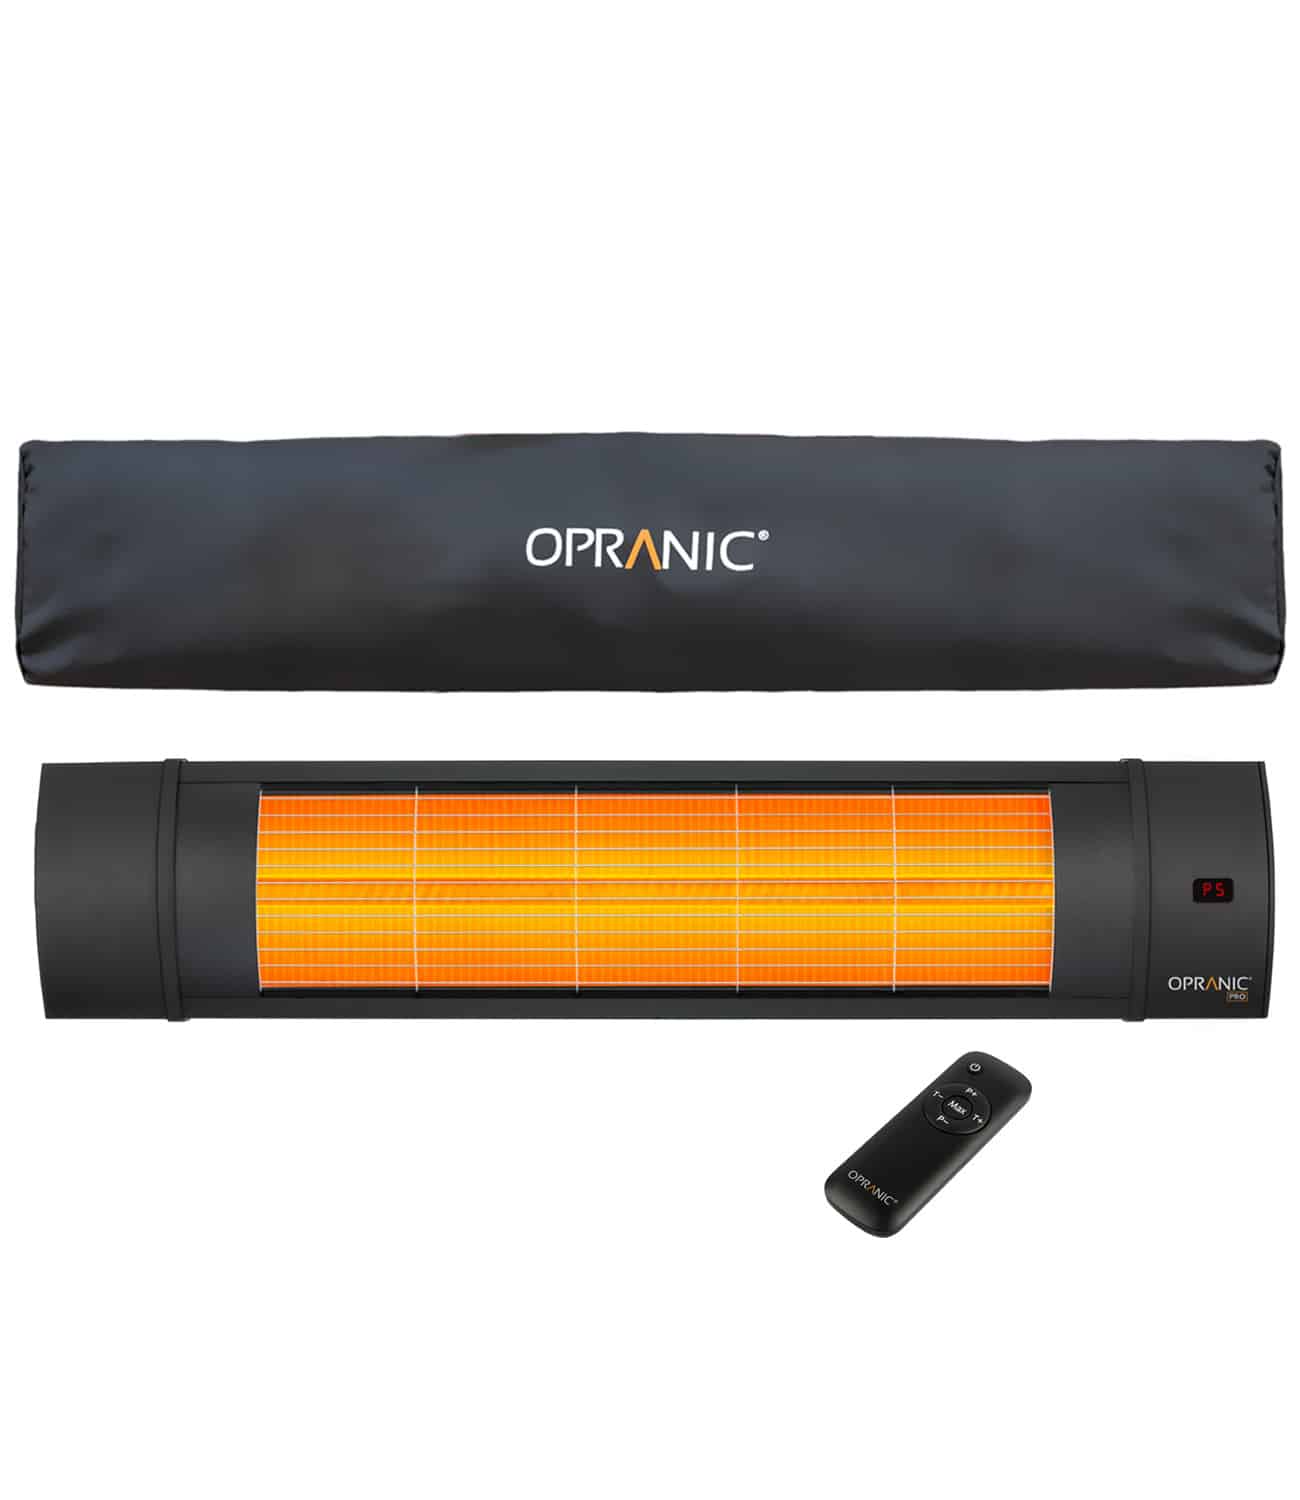 OPRANIC PRO V70, Wall Patio Heater 2300W, IR-X, IP65, Remote, Timer, Black with Cover